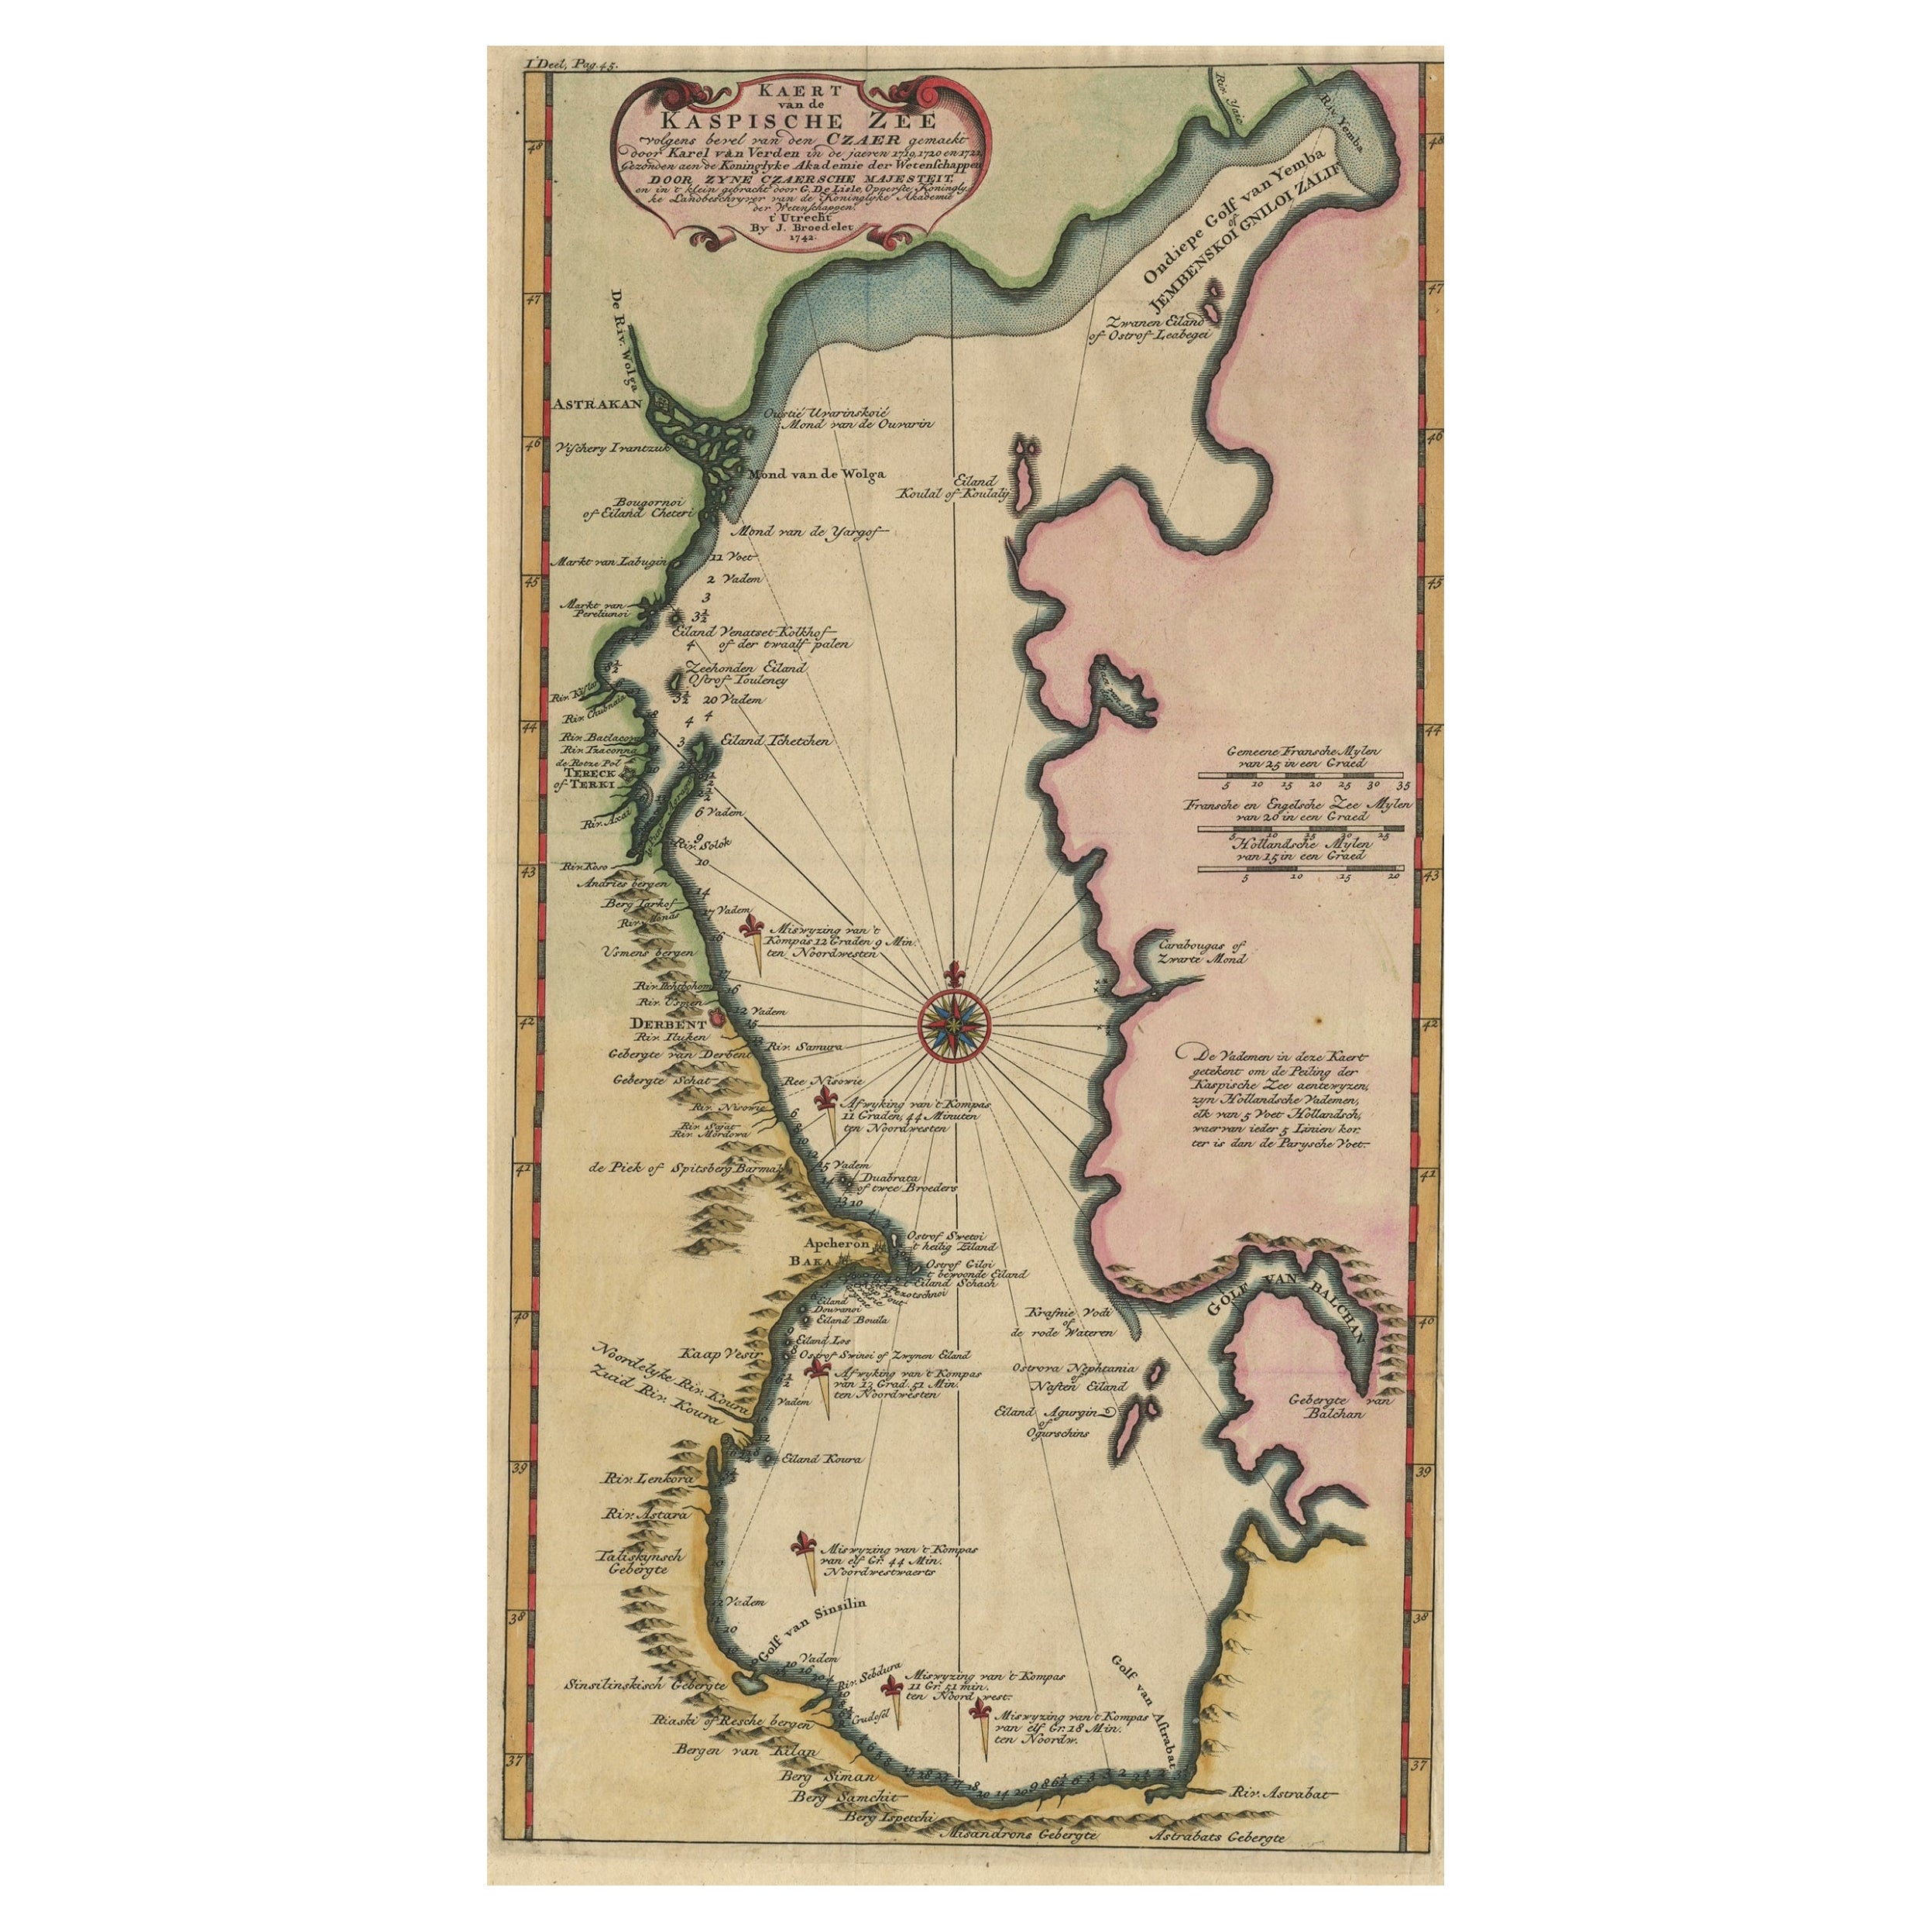 Uncommon and Rare Map of the Caspian Sea by Order of the Czar, 1742